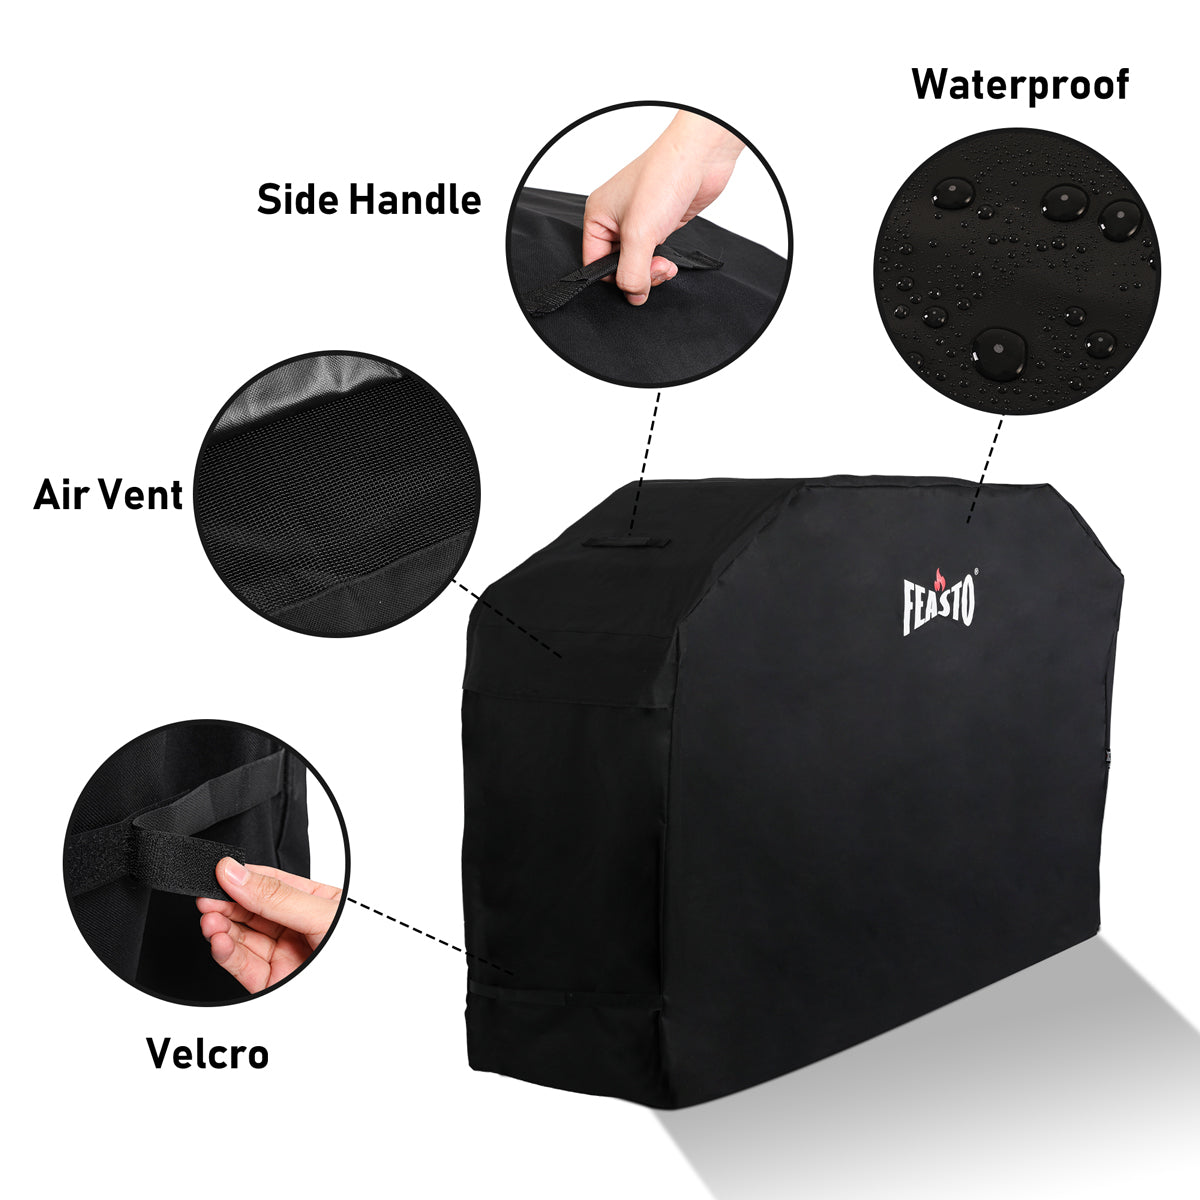 FEASTO Barbecue Grill Cover 72 inches Outdoor Large Waterproof Gas and Charcoal Grill Cover Fits Weber Char-Boil Nexgrill and more(L72” x W26” x H51”)